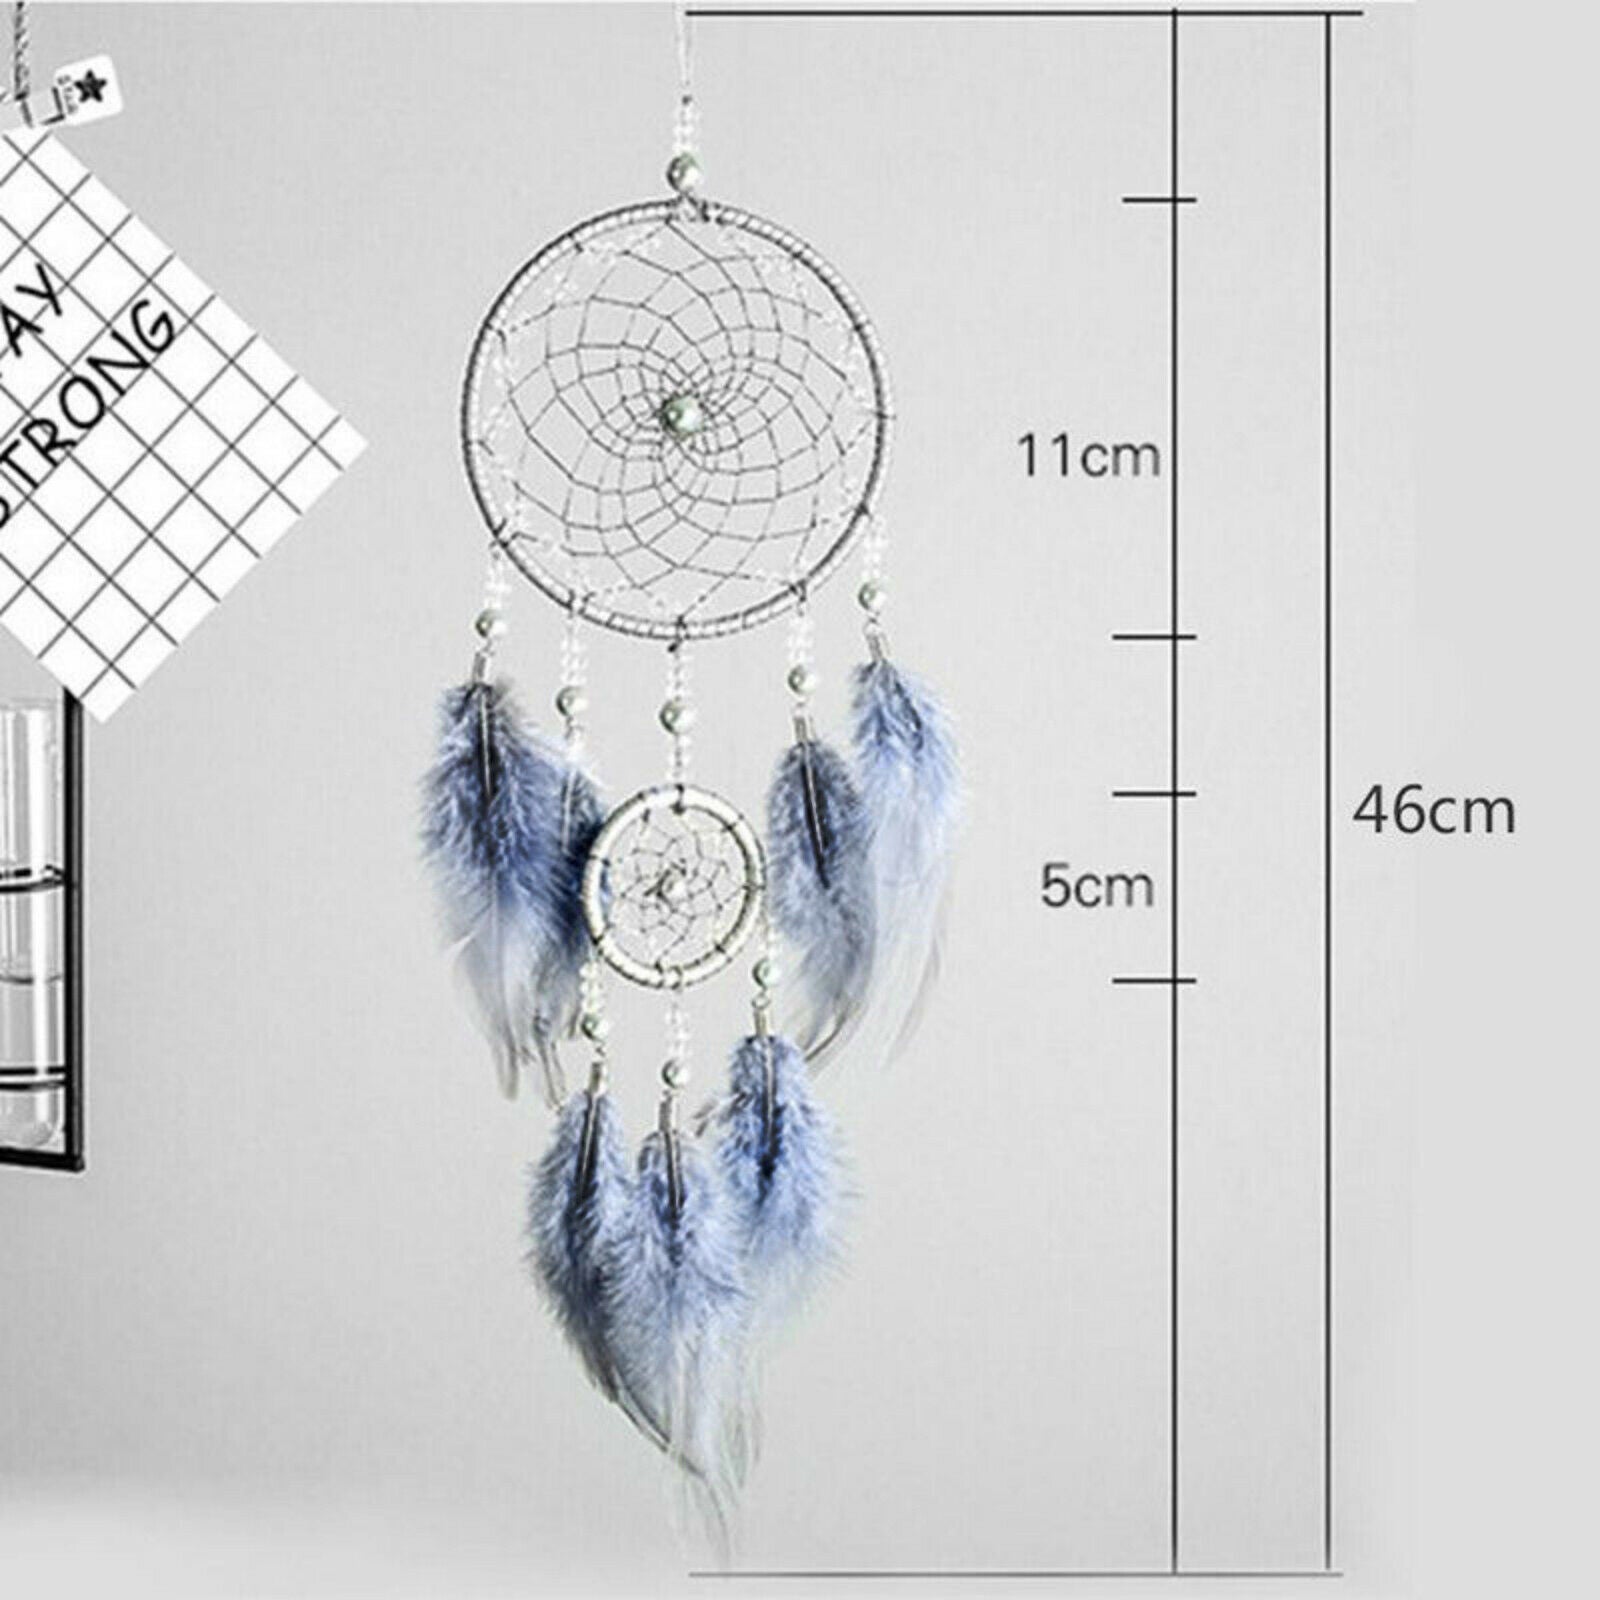 18" Dream Catcher Handmade Feather Car Wall Hanging Room Ornament Craft Gift